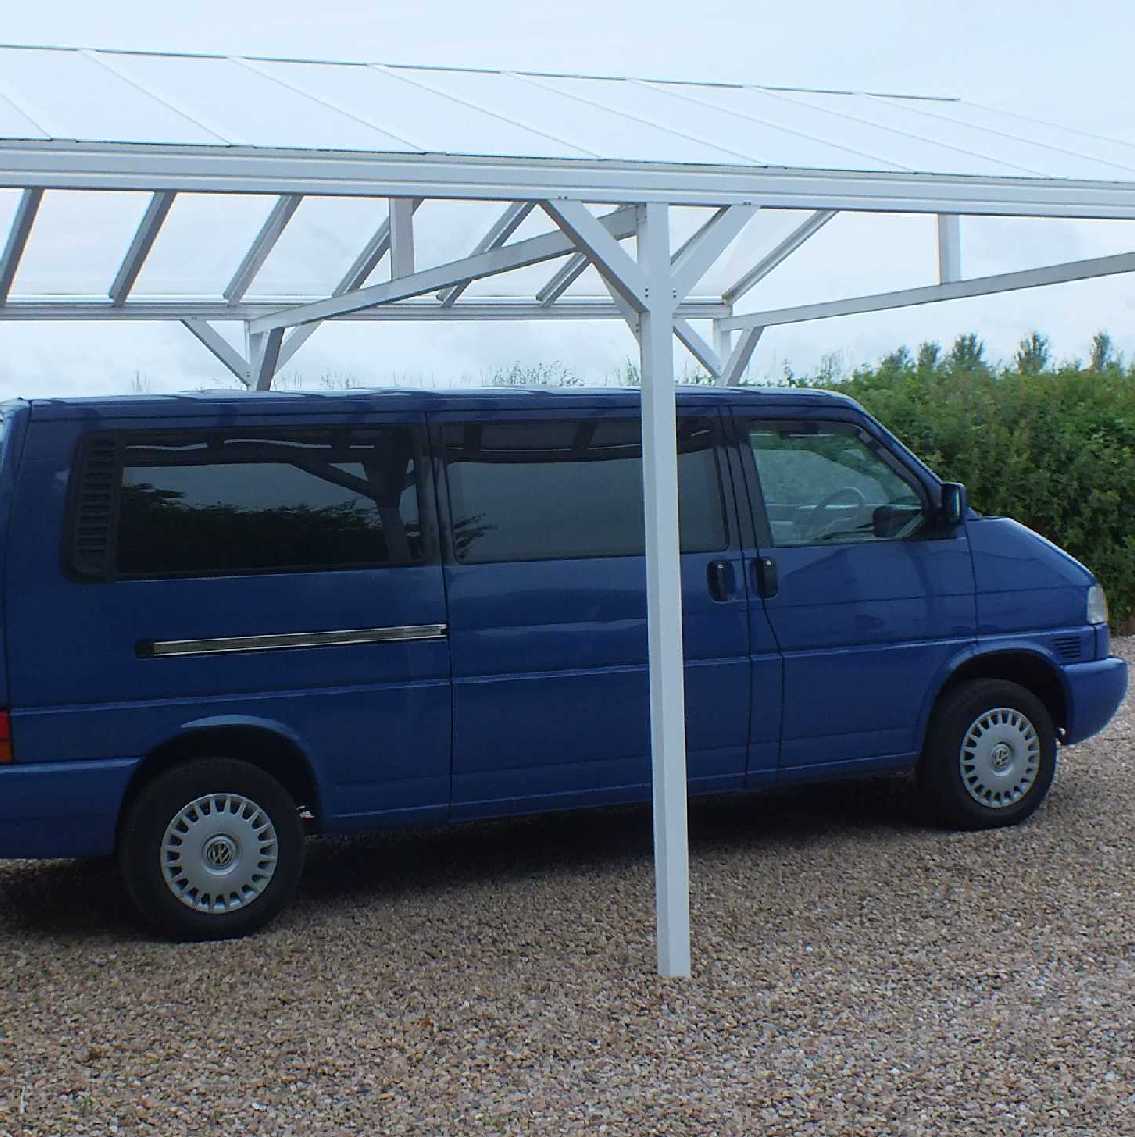 Great deals on Omega Smart Free-Standing, White Gable-Roof (type 1) Canopy with 16mm Polycarbonate Glazing - 8.4m (W) x 4.0m (P), (8) Supporting Posts